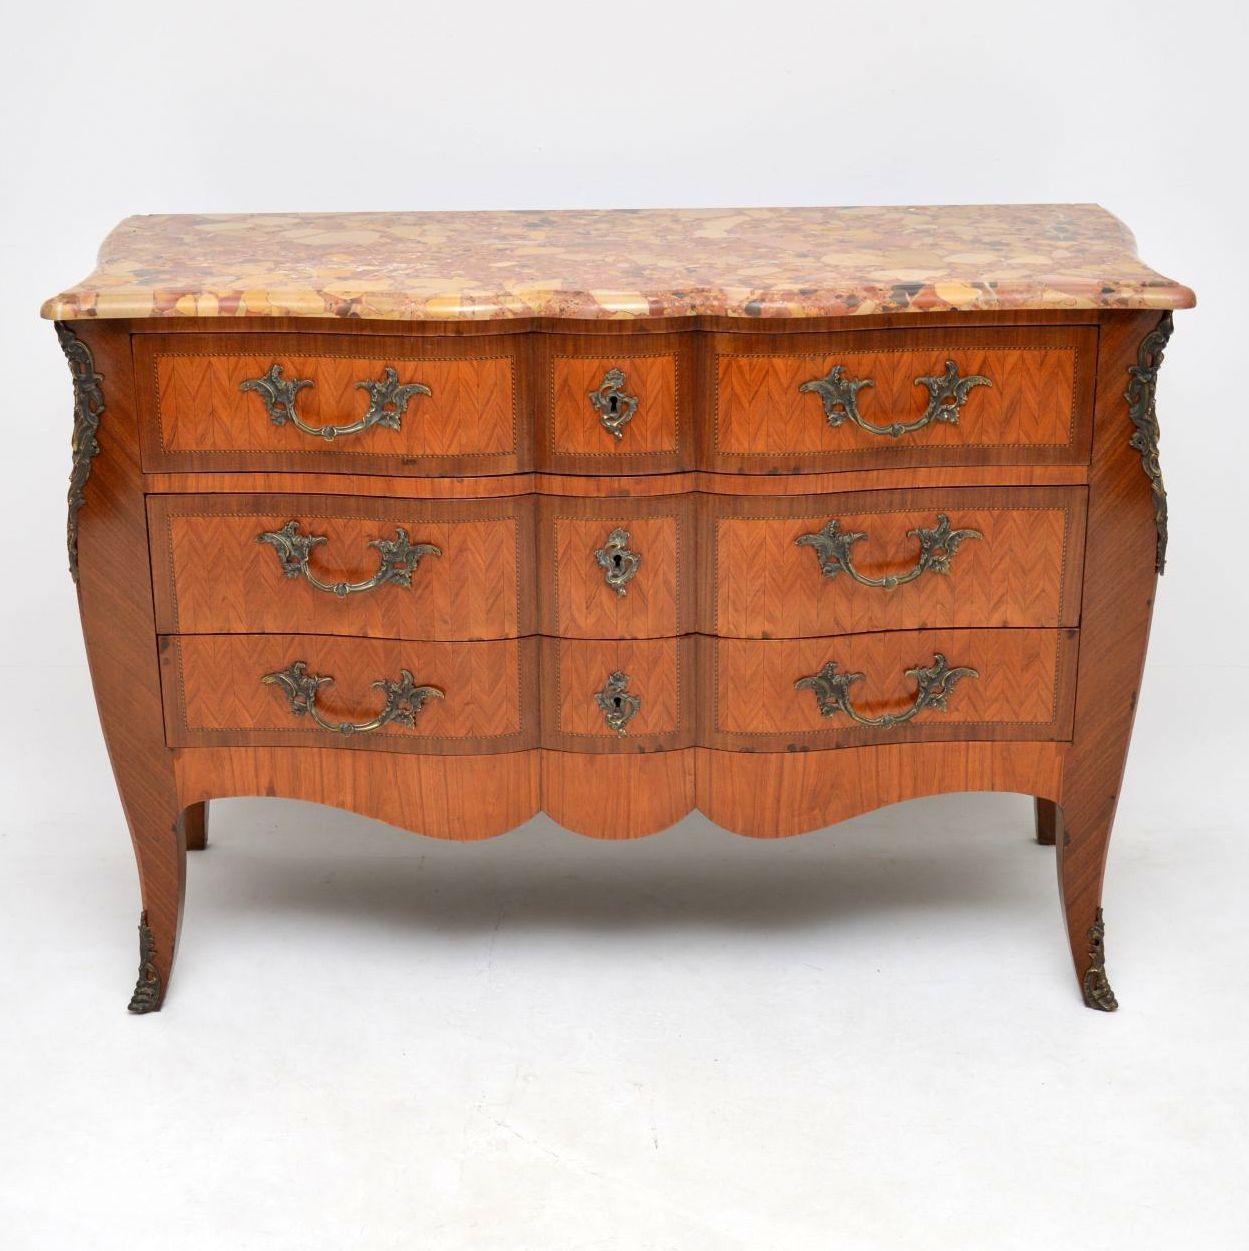 Very impressive antique French marble-top commode with a wonderful shape and a fitted secretaire writing compartment within the dummy top drawer. I’ve never come across a shaped commode like this with a secretaire inside. It has a very colorful and